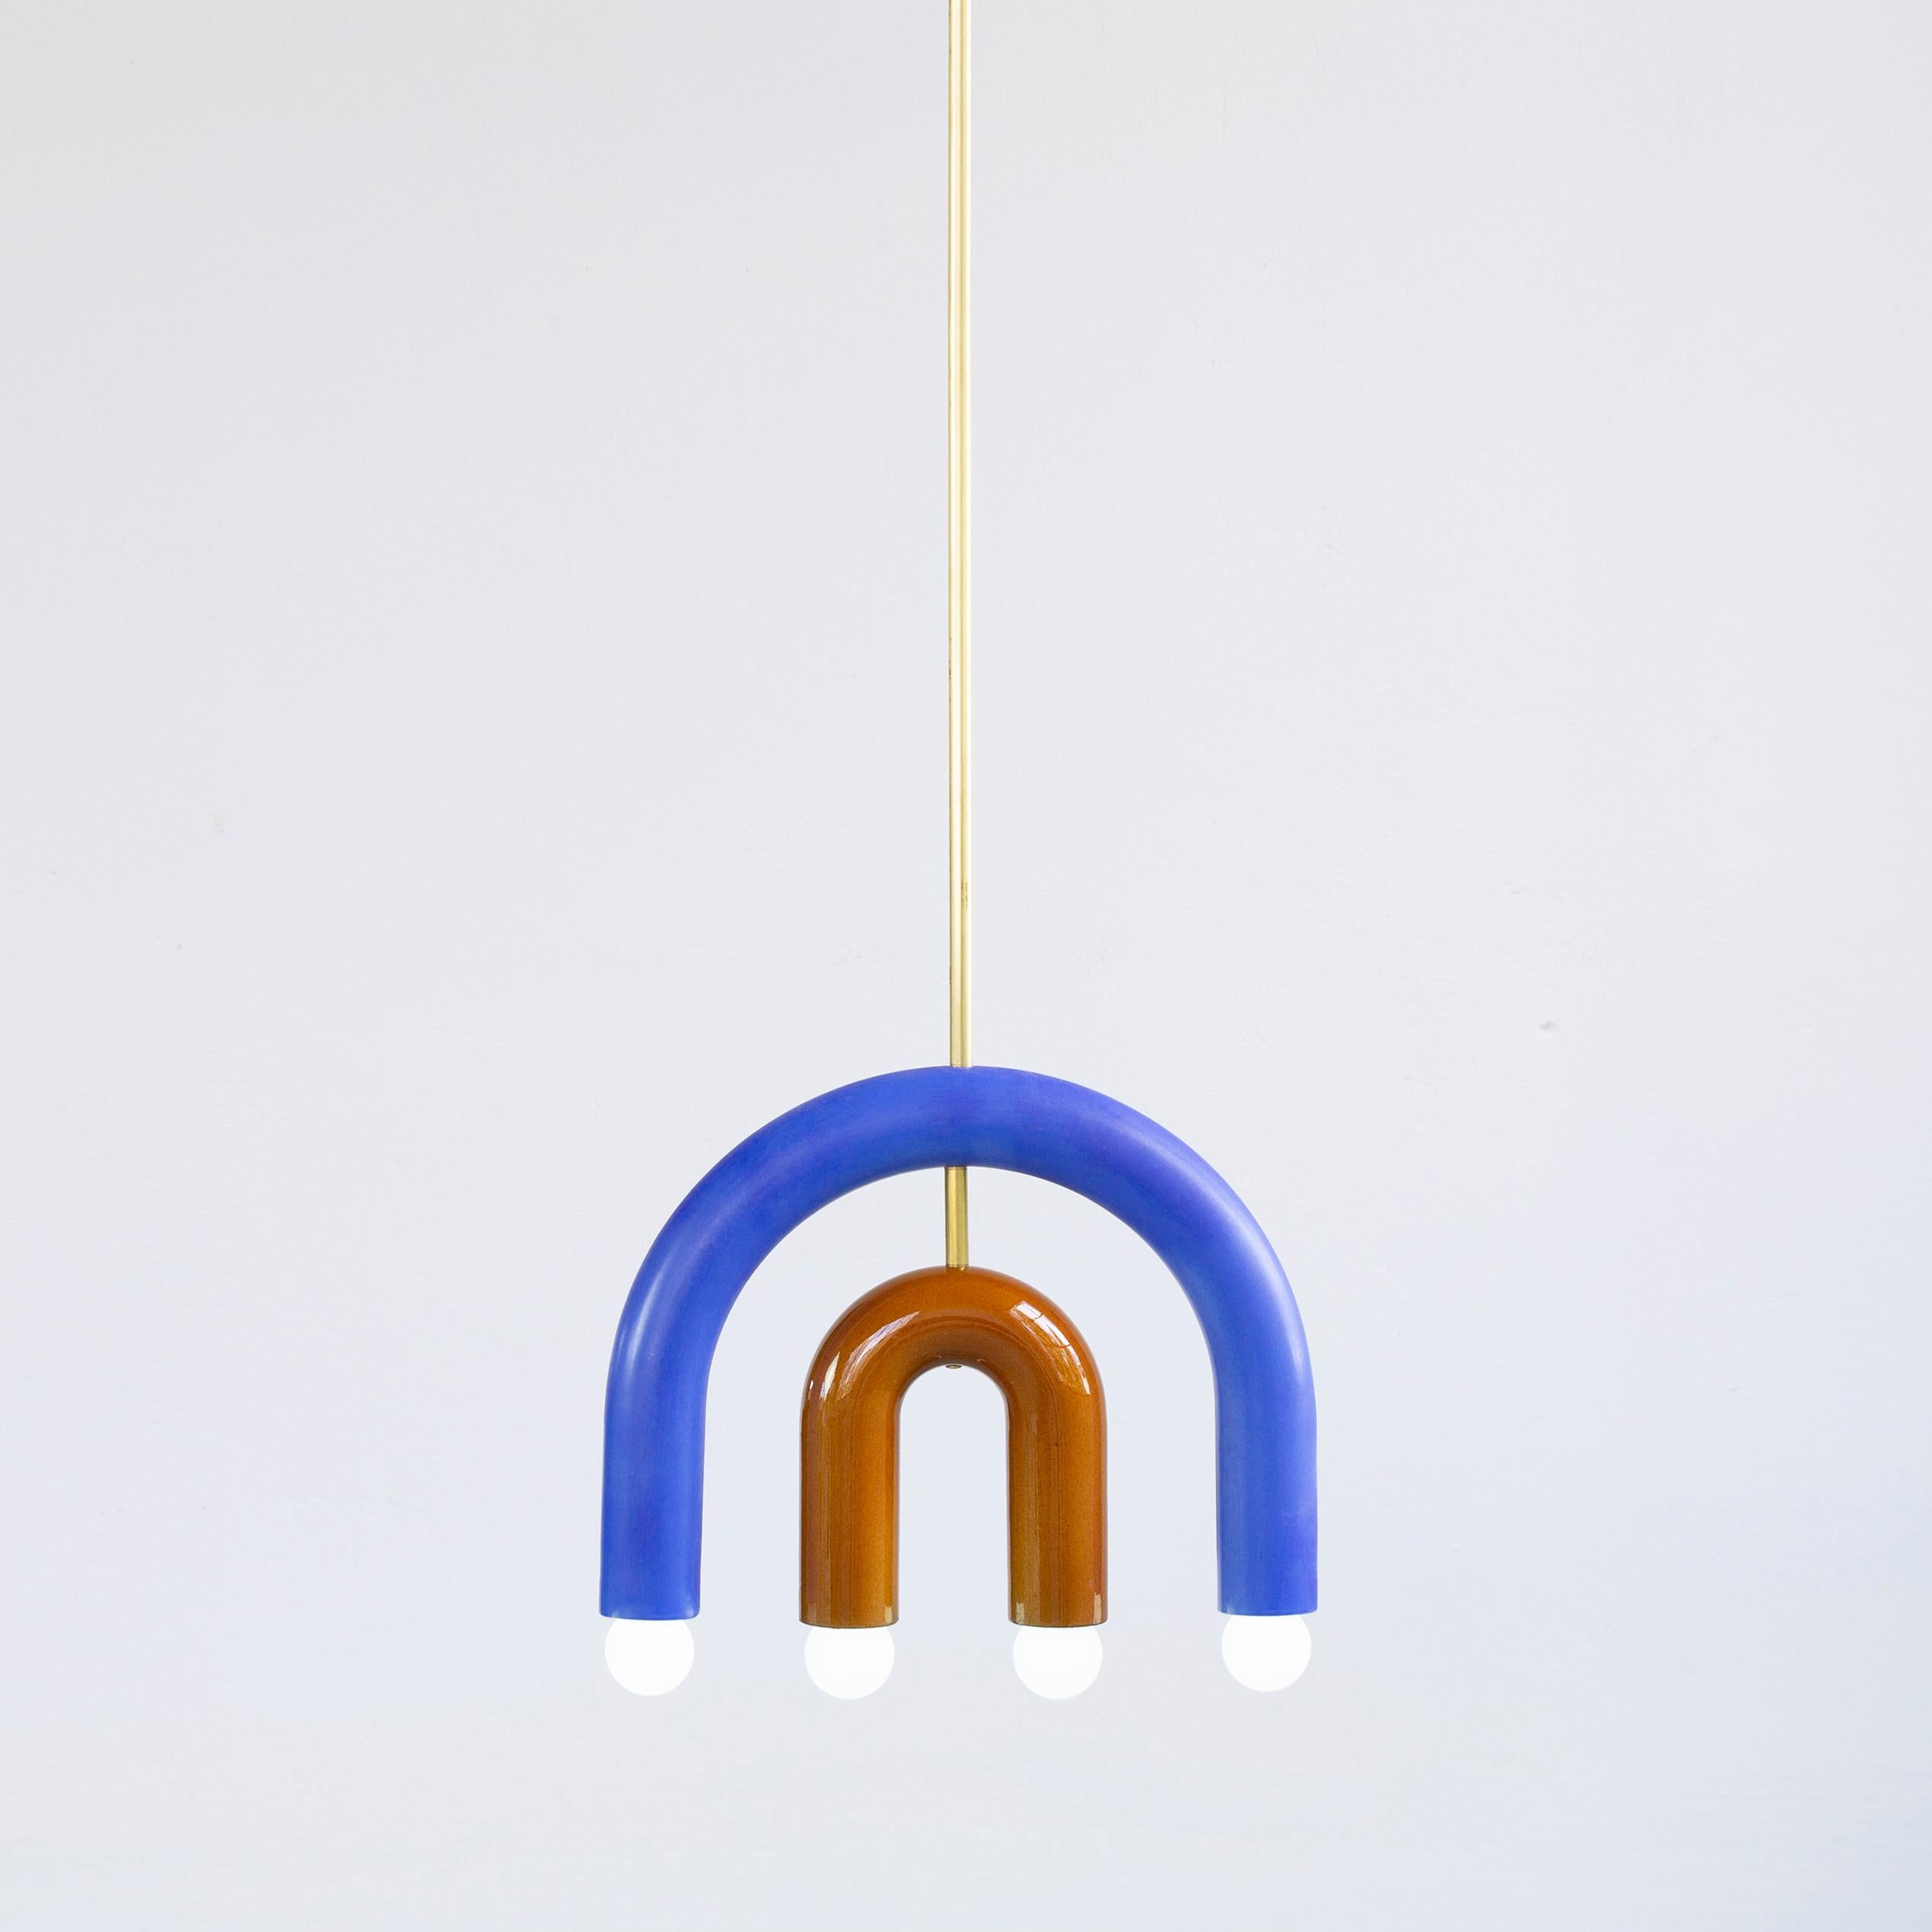 TRN C1 pendant lamp I by Pani Jurek
Dimensions: D 5 x W 35 x H 28 cm 
Material: Hand glazed ceramic and brass.
Available in other colors.
Lamps from the TRN collection hang on a metal tube, not on a cable. This allows the lamp to be mounted in a